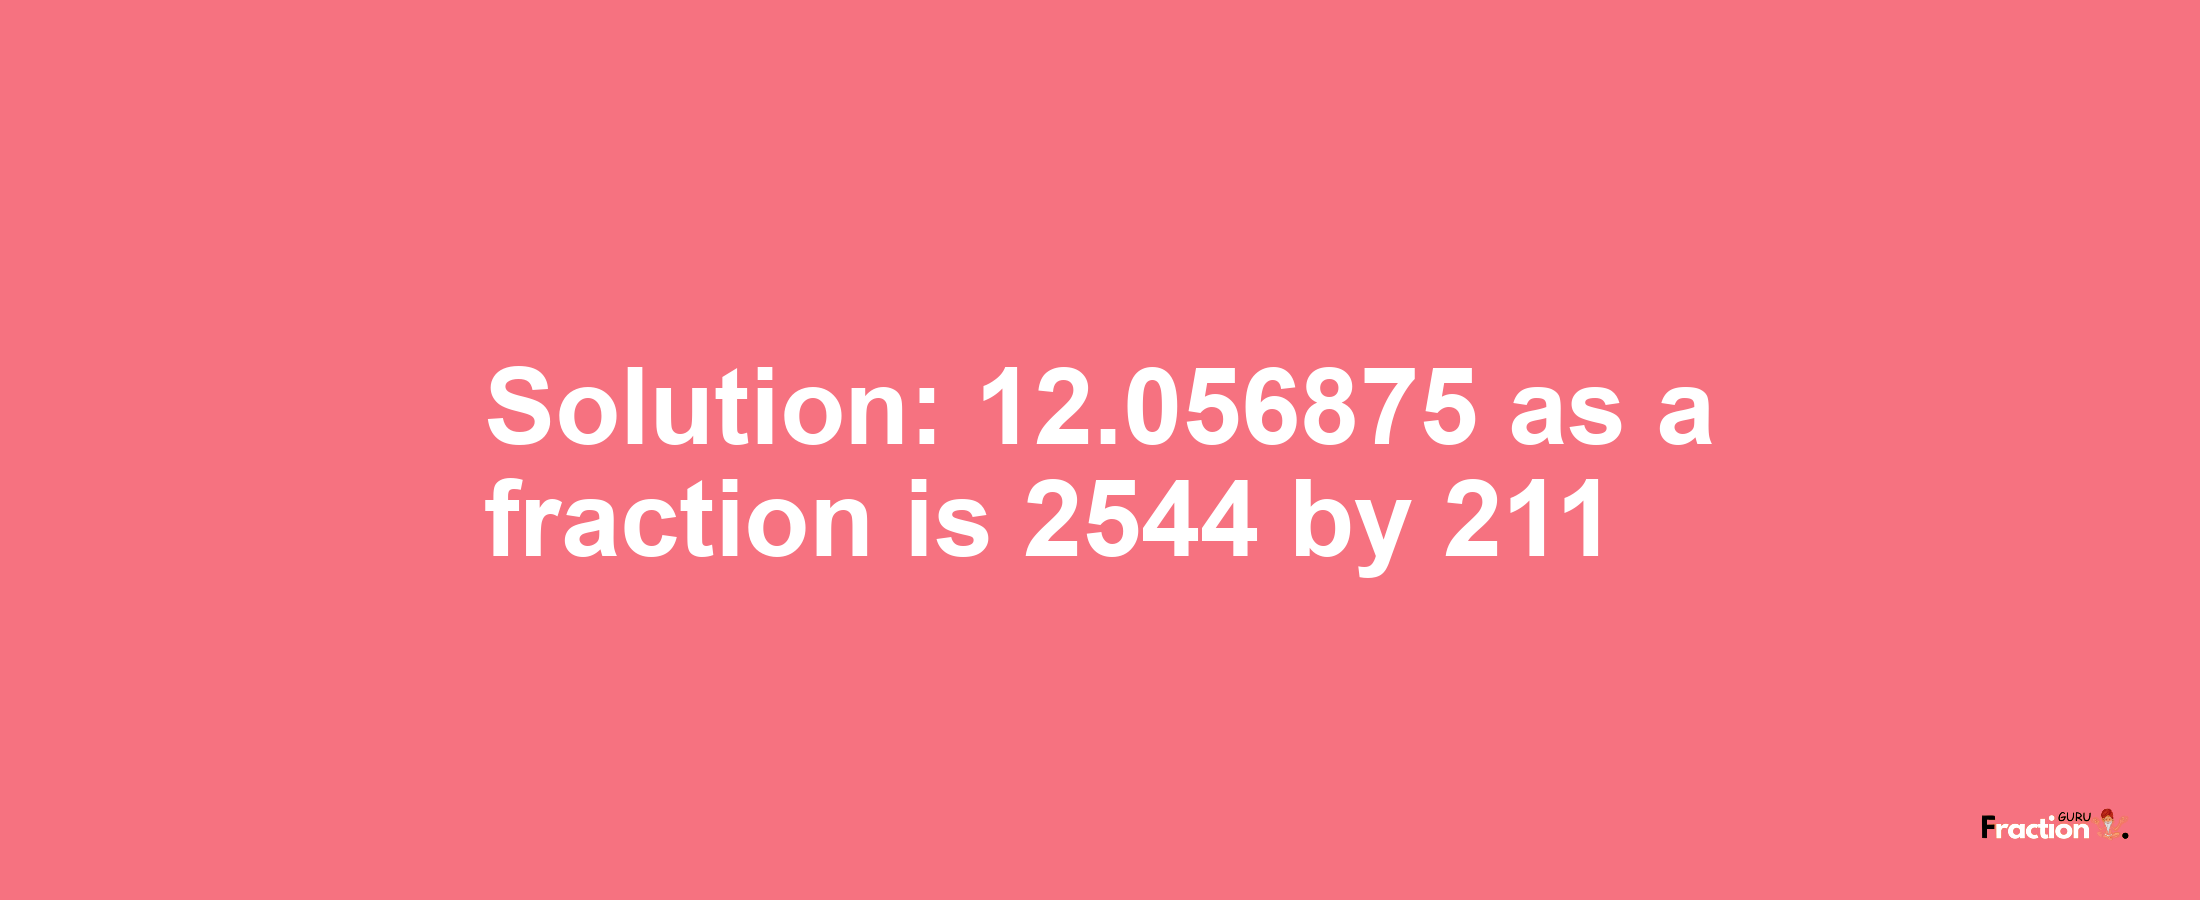 Solution:12.056875 as a fraction is 2544/211